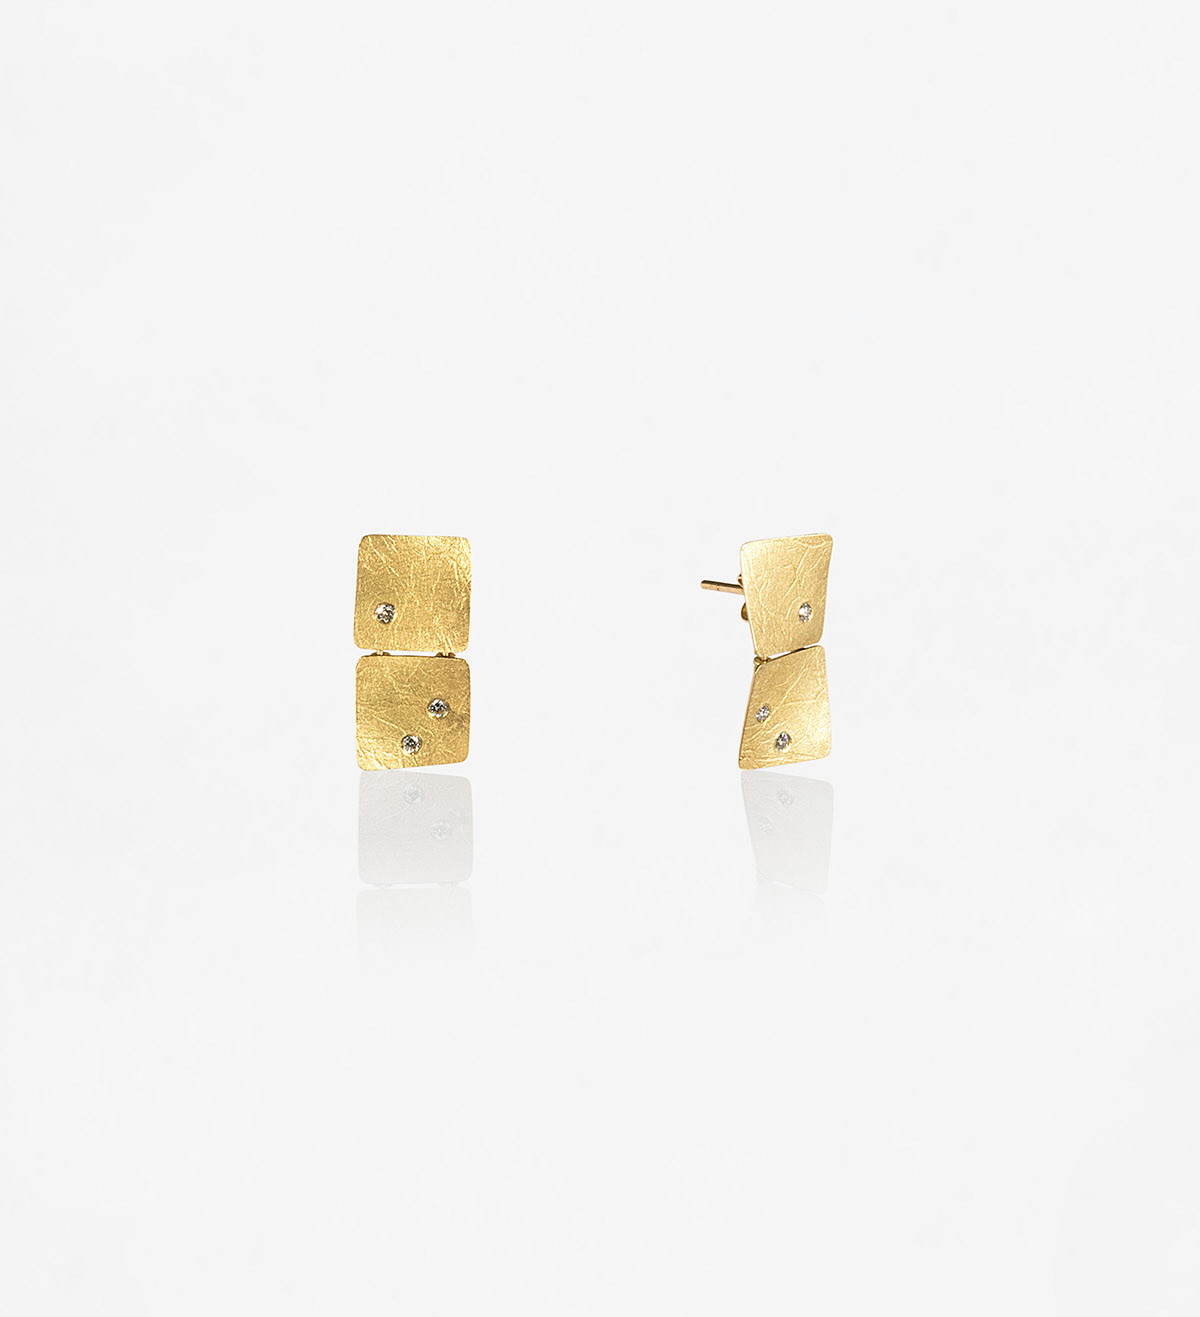 18k gold earrings Ones 22mm with diamonds 0,15ct